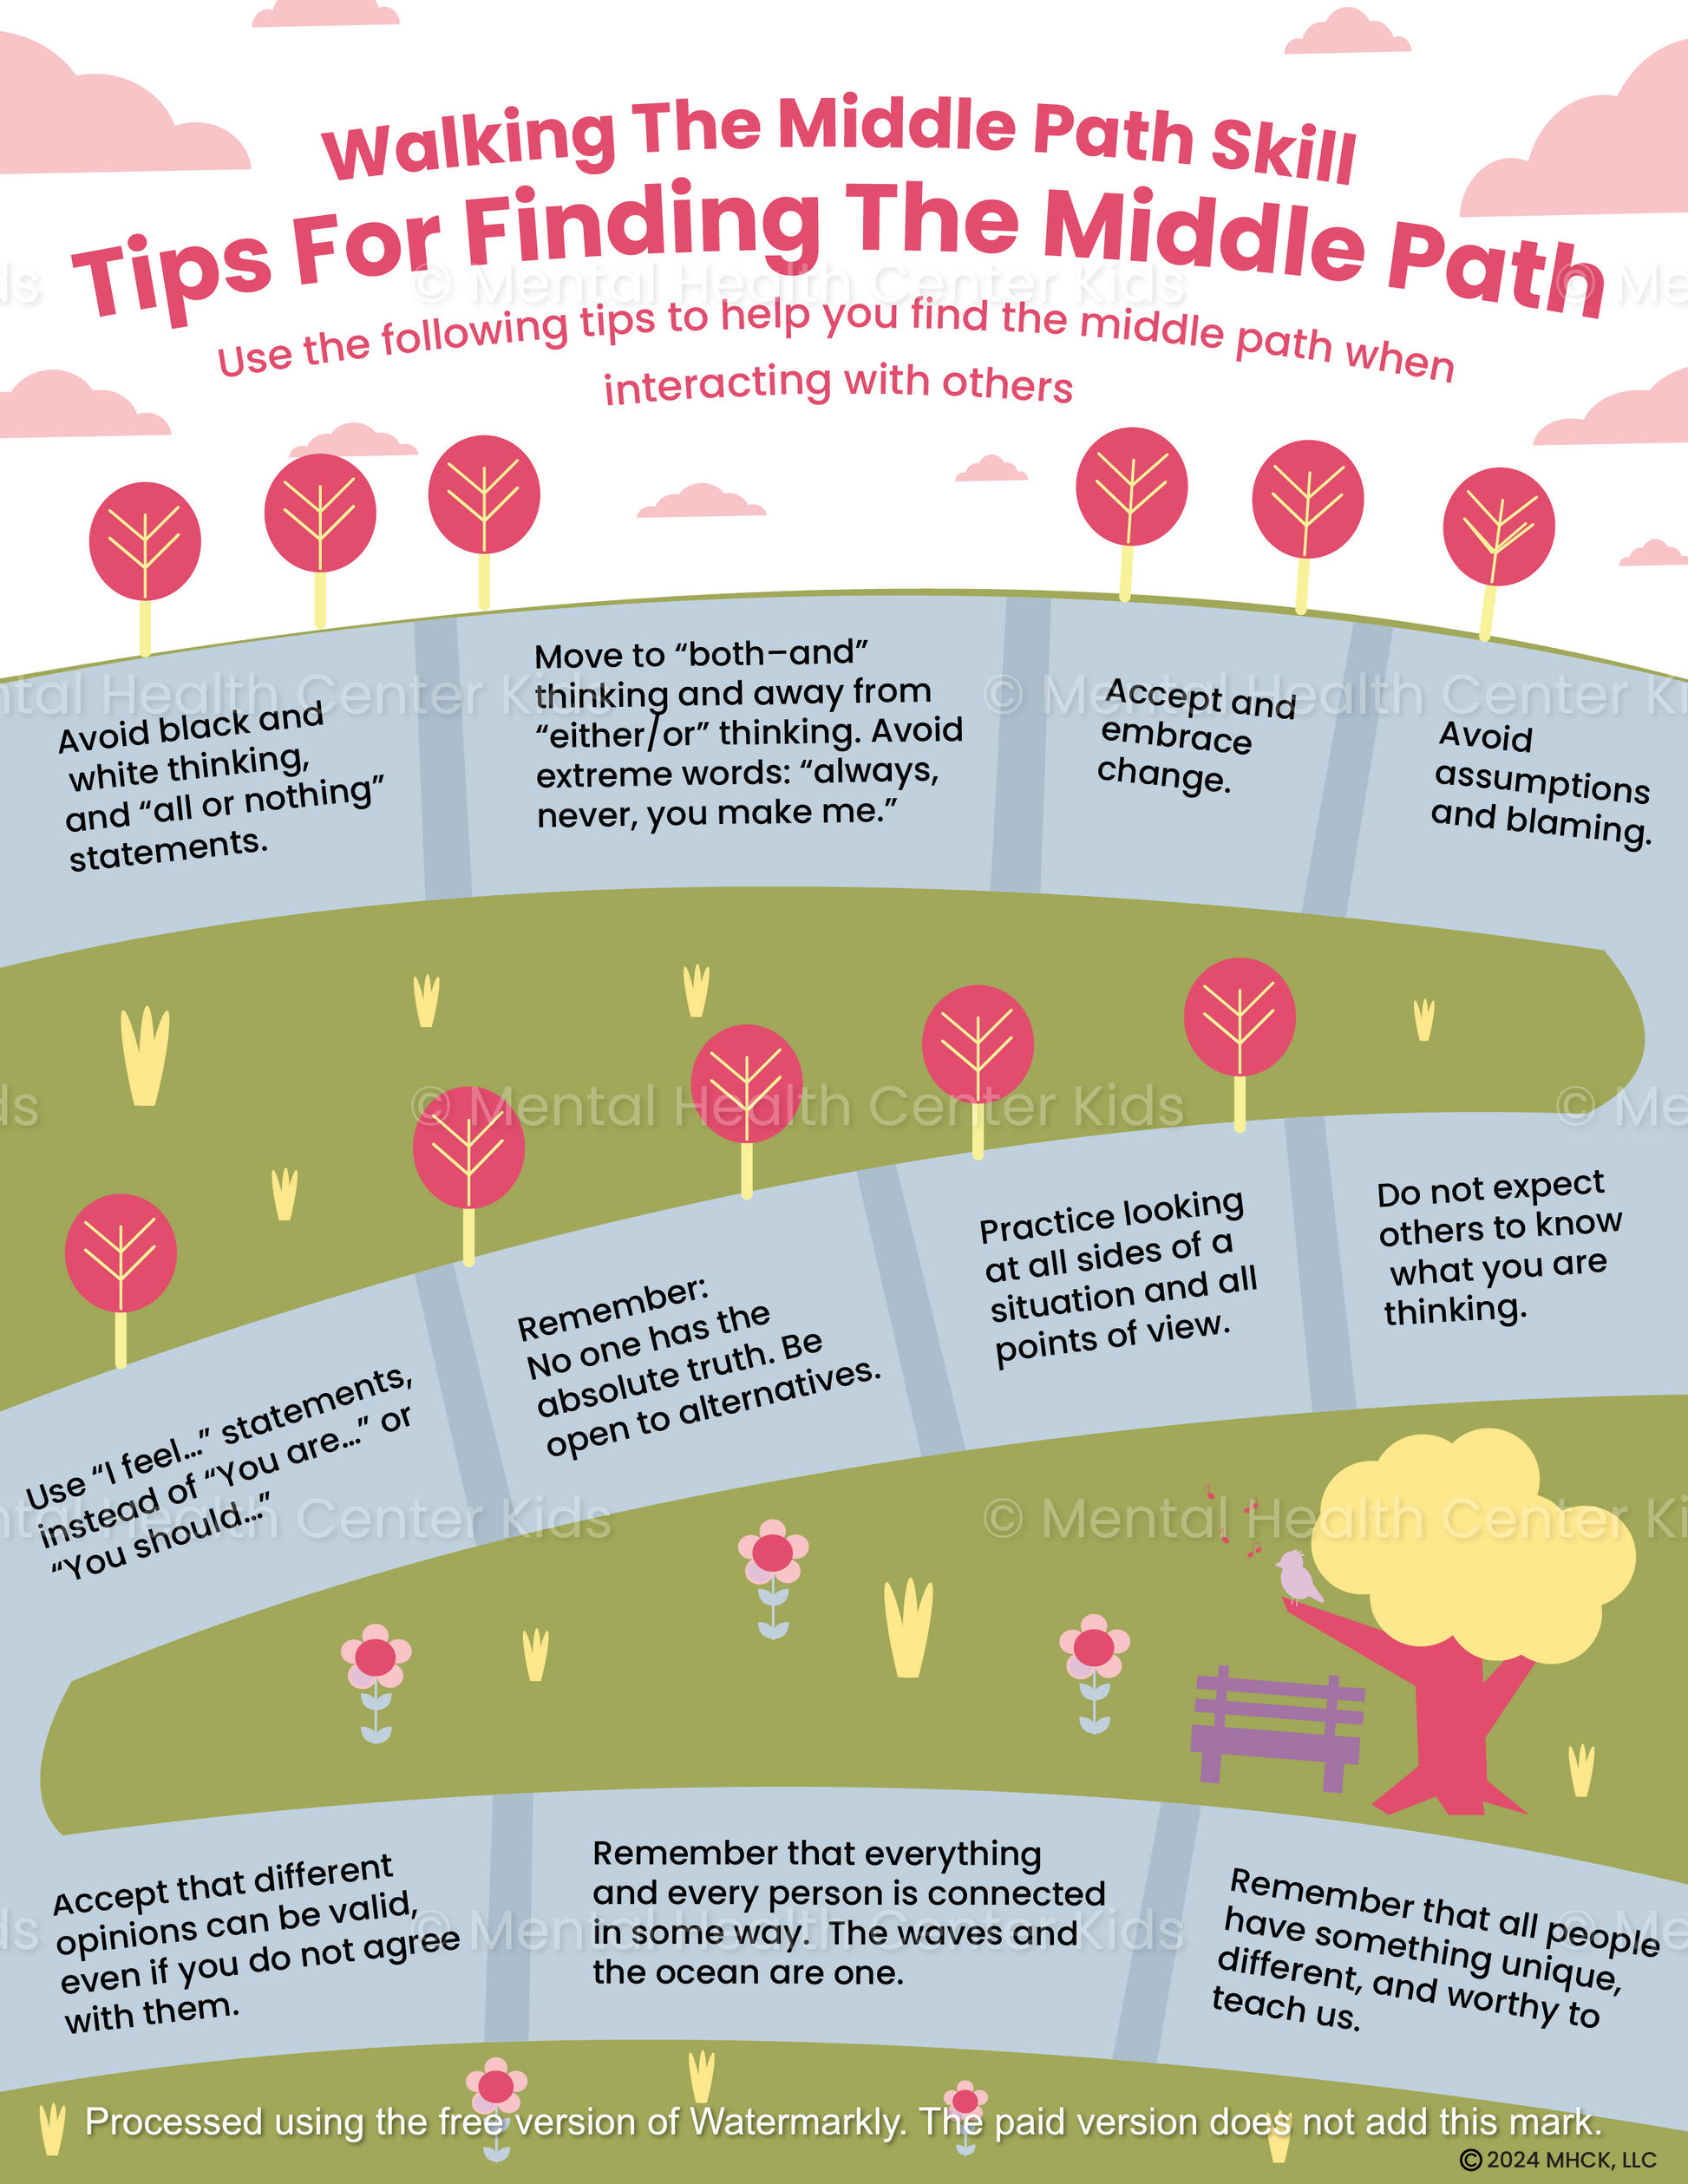 dbt tips for finding the middle path